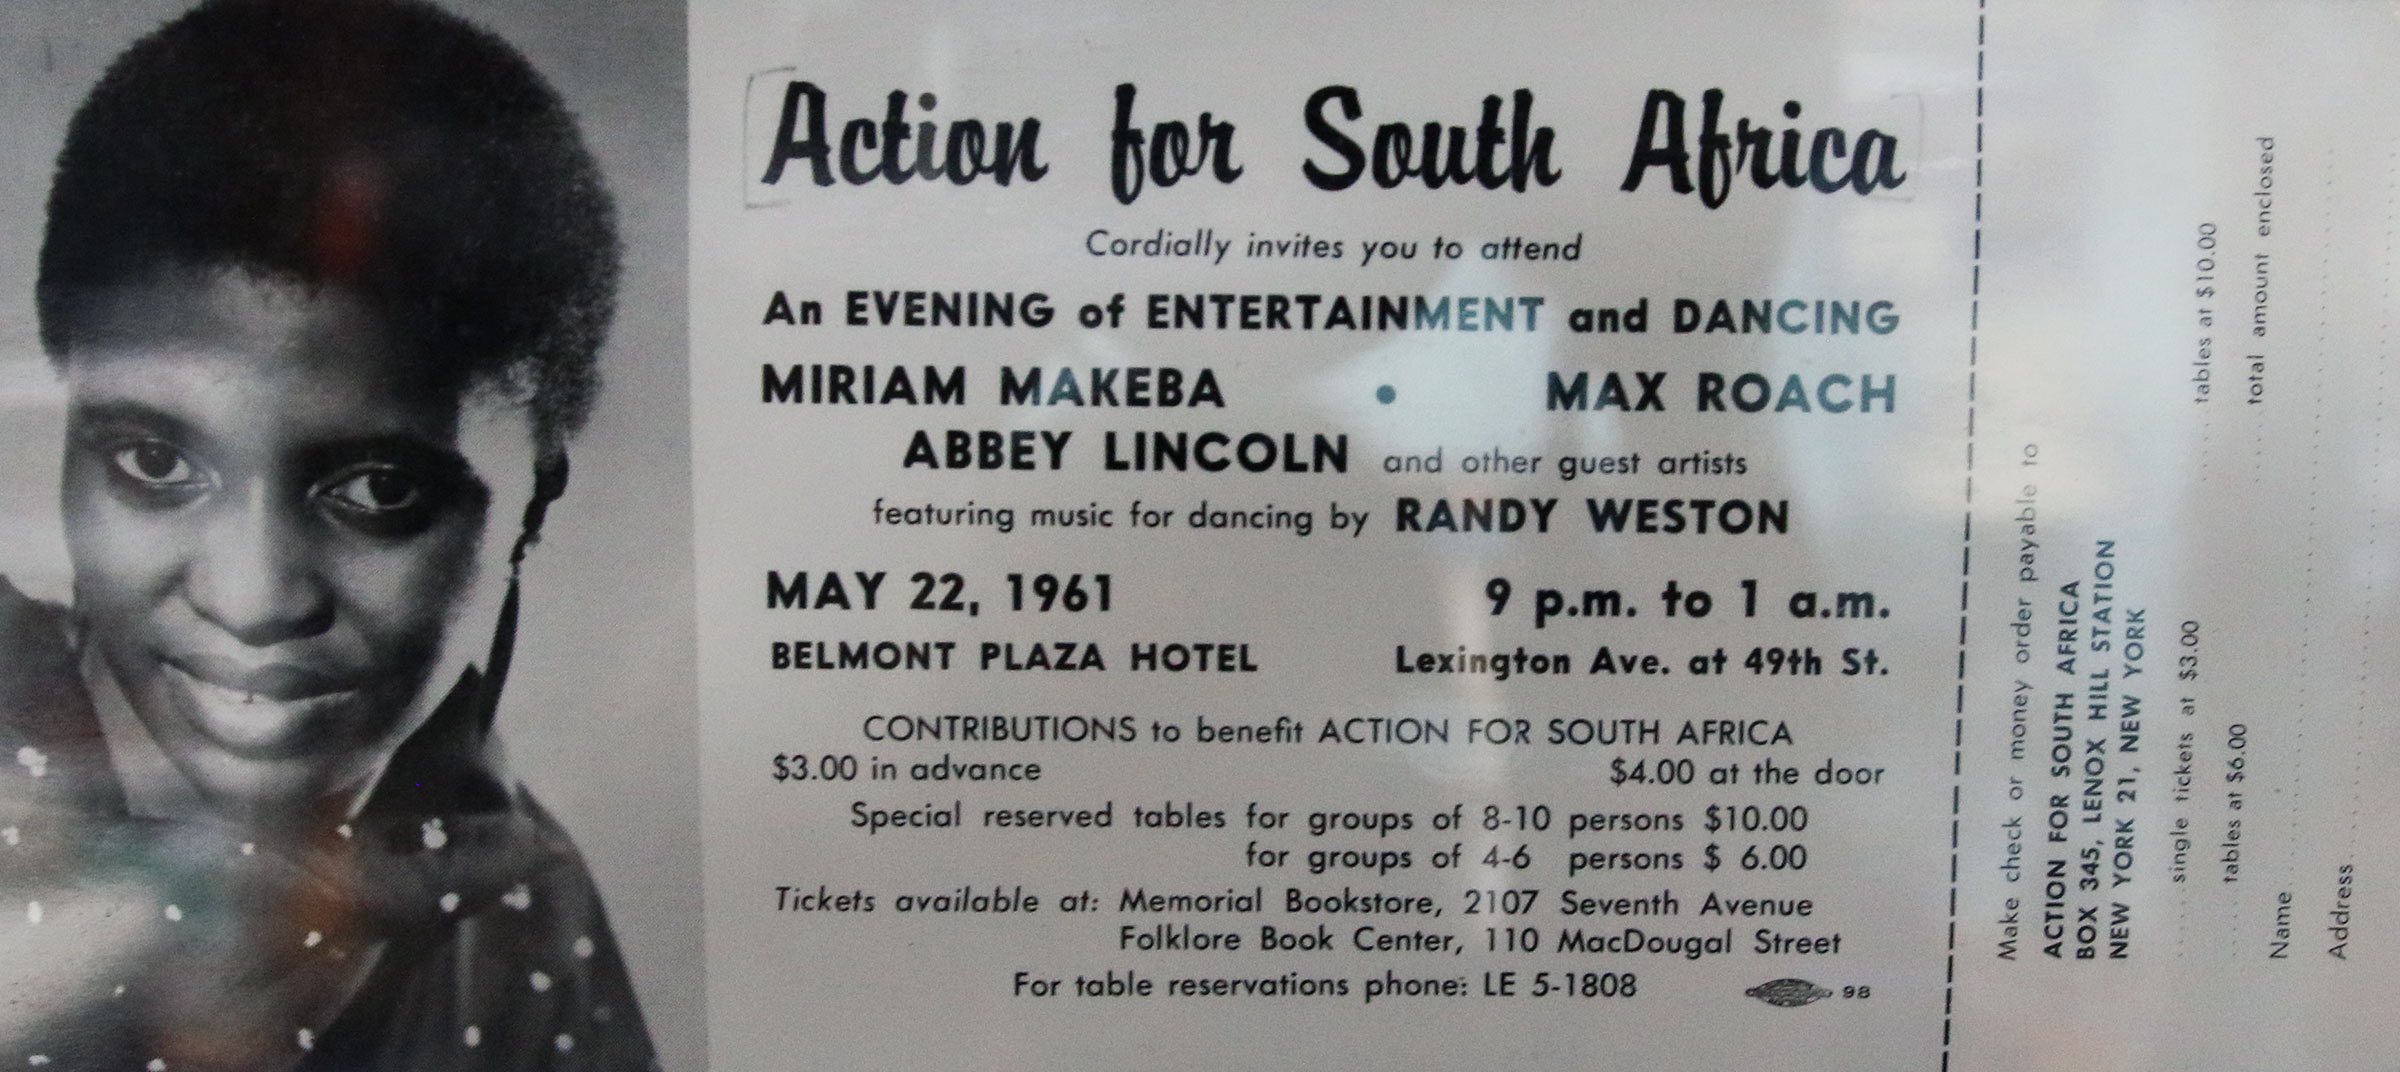 A poster for a concert benefit entitled Action for South Africa at the Belmont Plaza Hotel on May 22, 1961 which featured performances by Randy Weston, Max Roach, Abbey Lincoln, and Miriam Makeba (who is pictured on it). 